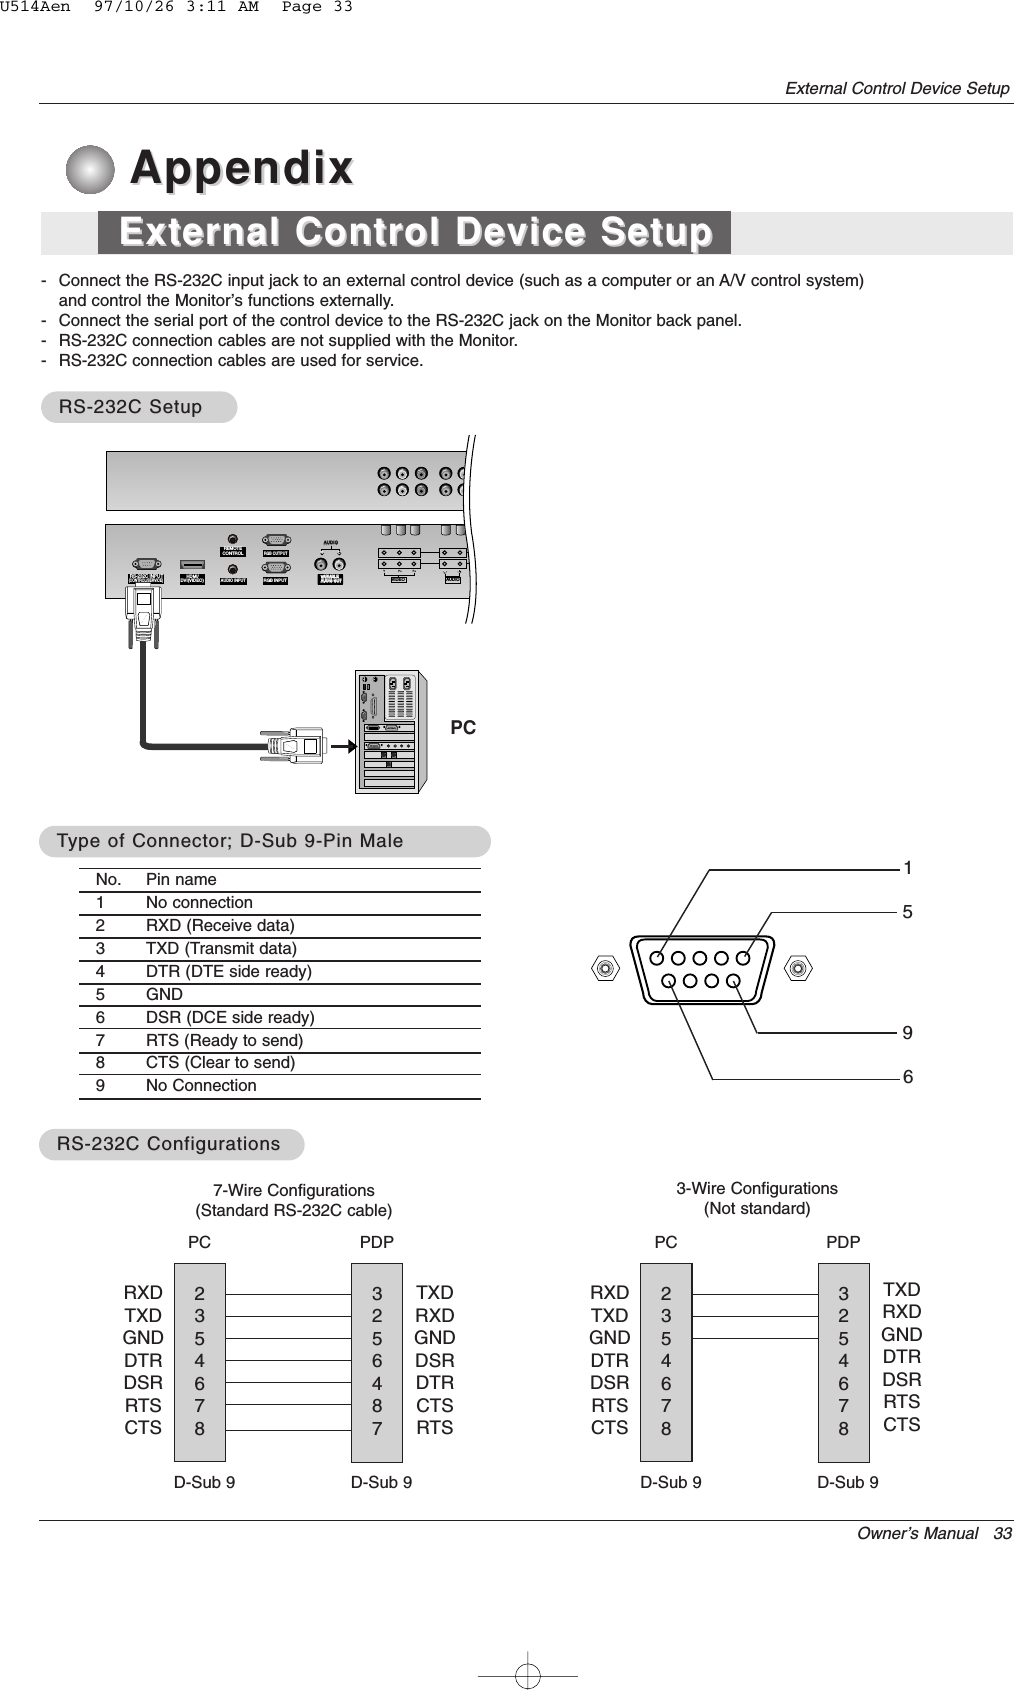 Owner’s Manual   33External Control Device SetupRS-232C INPUT(CONTROL/SERVICE)AUDIO AUDIO LR REMOTECONTROLAUDIO INPUTRGB INPUTVARIABLE ARIABLE AUDIO OUTAUDIO OUT     HDMI/DVI(VIDEO)RGB OUTPUTAUDIOVIDEORLNo. Pin name1 No connection2 RXD (Receive data)3 TXD (Transmit data)4 DTR (DTE side ready)5 GND6 DSR (DCE side ready)7 RTS (Ready to send)8 CTS (Clear to send)9 No Connection15692354678RXDTXDGNDDTRDSRRTSCTSTXDRXDGNDDSRDTRCTSRTSPC7-Wire Configurations(Standard RS-232C cable)D-Sub 93256487PDPD-Sub 92354678RXDTXDGNDDTRDSRRTSCTSTXDRXDGNDDTRDSRRTSCTSPC3-Wire Configurations(Not standard)D-Sub 93254678PDPD-Sub 9- Connect the RS-232C input jack to an external control device (such as a computer or an A/V control system)and control the Monitor’s functions externally.- Connect the serial port of the control device to the RS-232C jack on the Monitor back panel.- RS-232C connection cables are not supplied with the Monitor.- RS-232C connection cables are used for service.TType of Connector; D-Sub 9-Pin Maleype of Connector; D-Sub 9-Pin MaleRS-232C ConfigurationsRS-232C ConfigurationsRS-232C SetupRS-232C SetupPCAppendixAppendixExternal Control Device SetupExternal Control Device SetupU514Aen  97/10/26 3:11 AM  Page 33